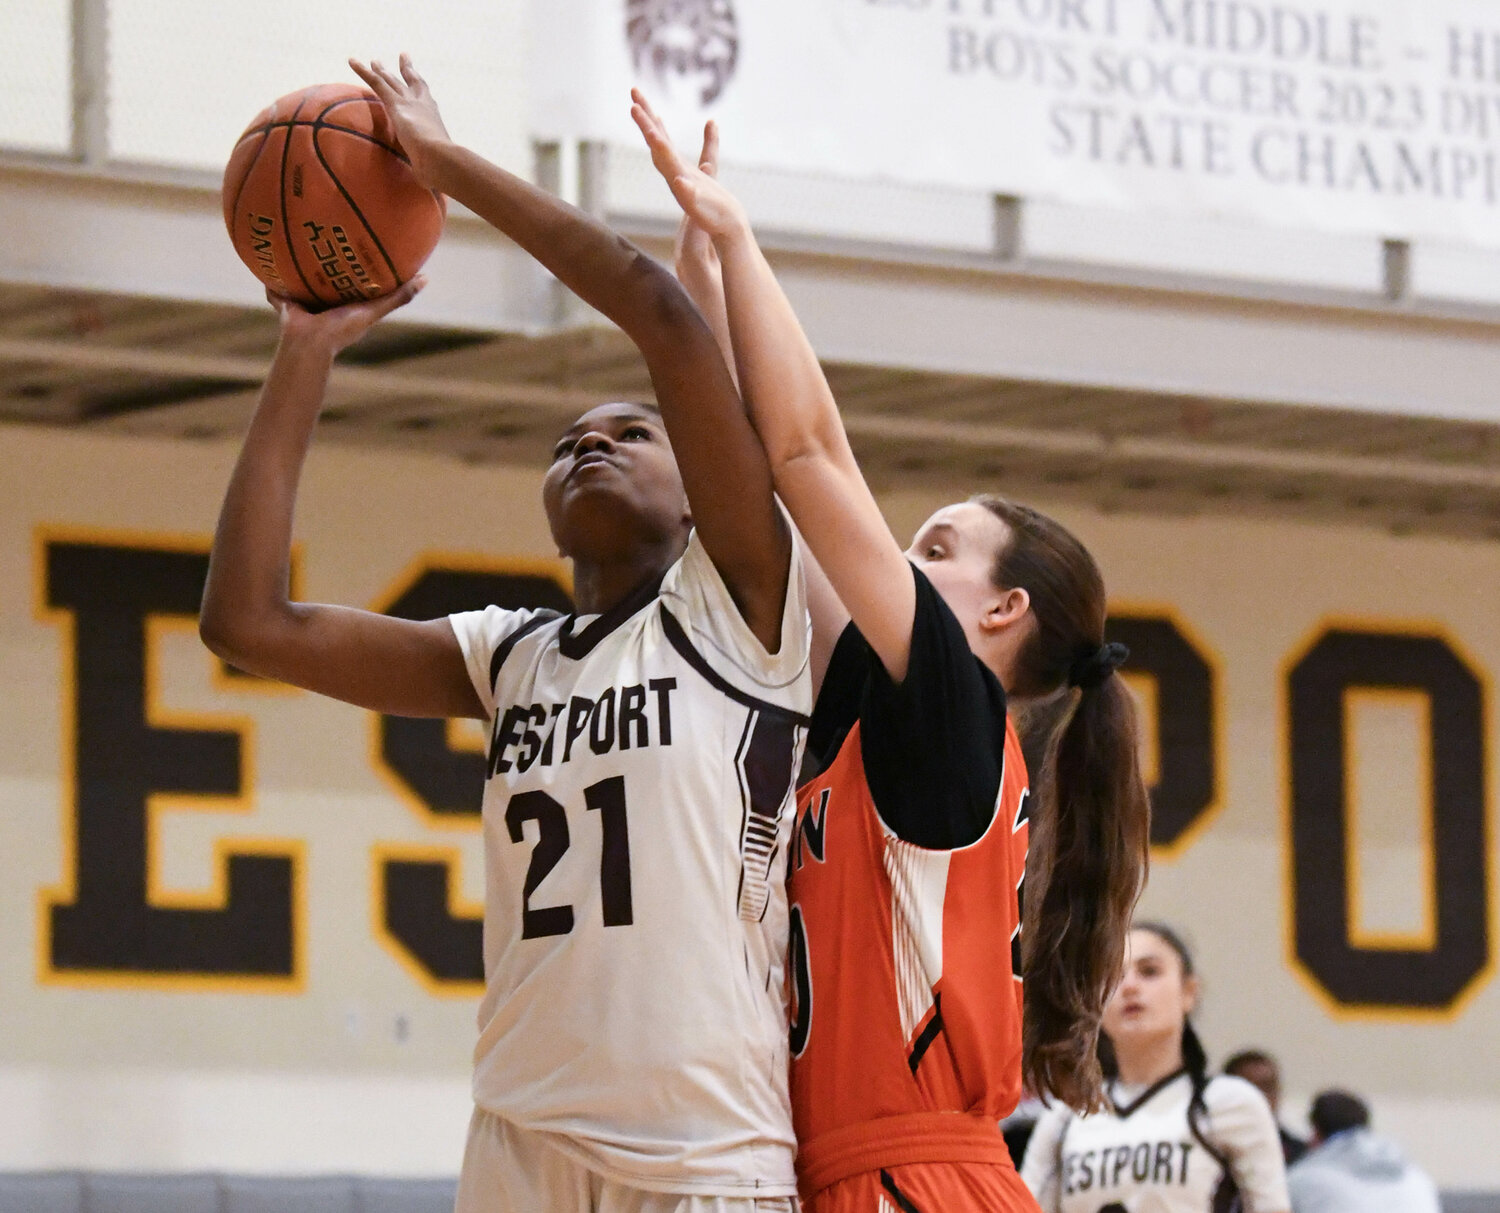 Jenna Egbe looks to shoot during the win. Egbe scored 9 points.